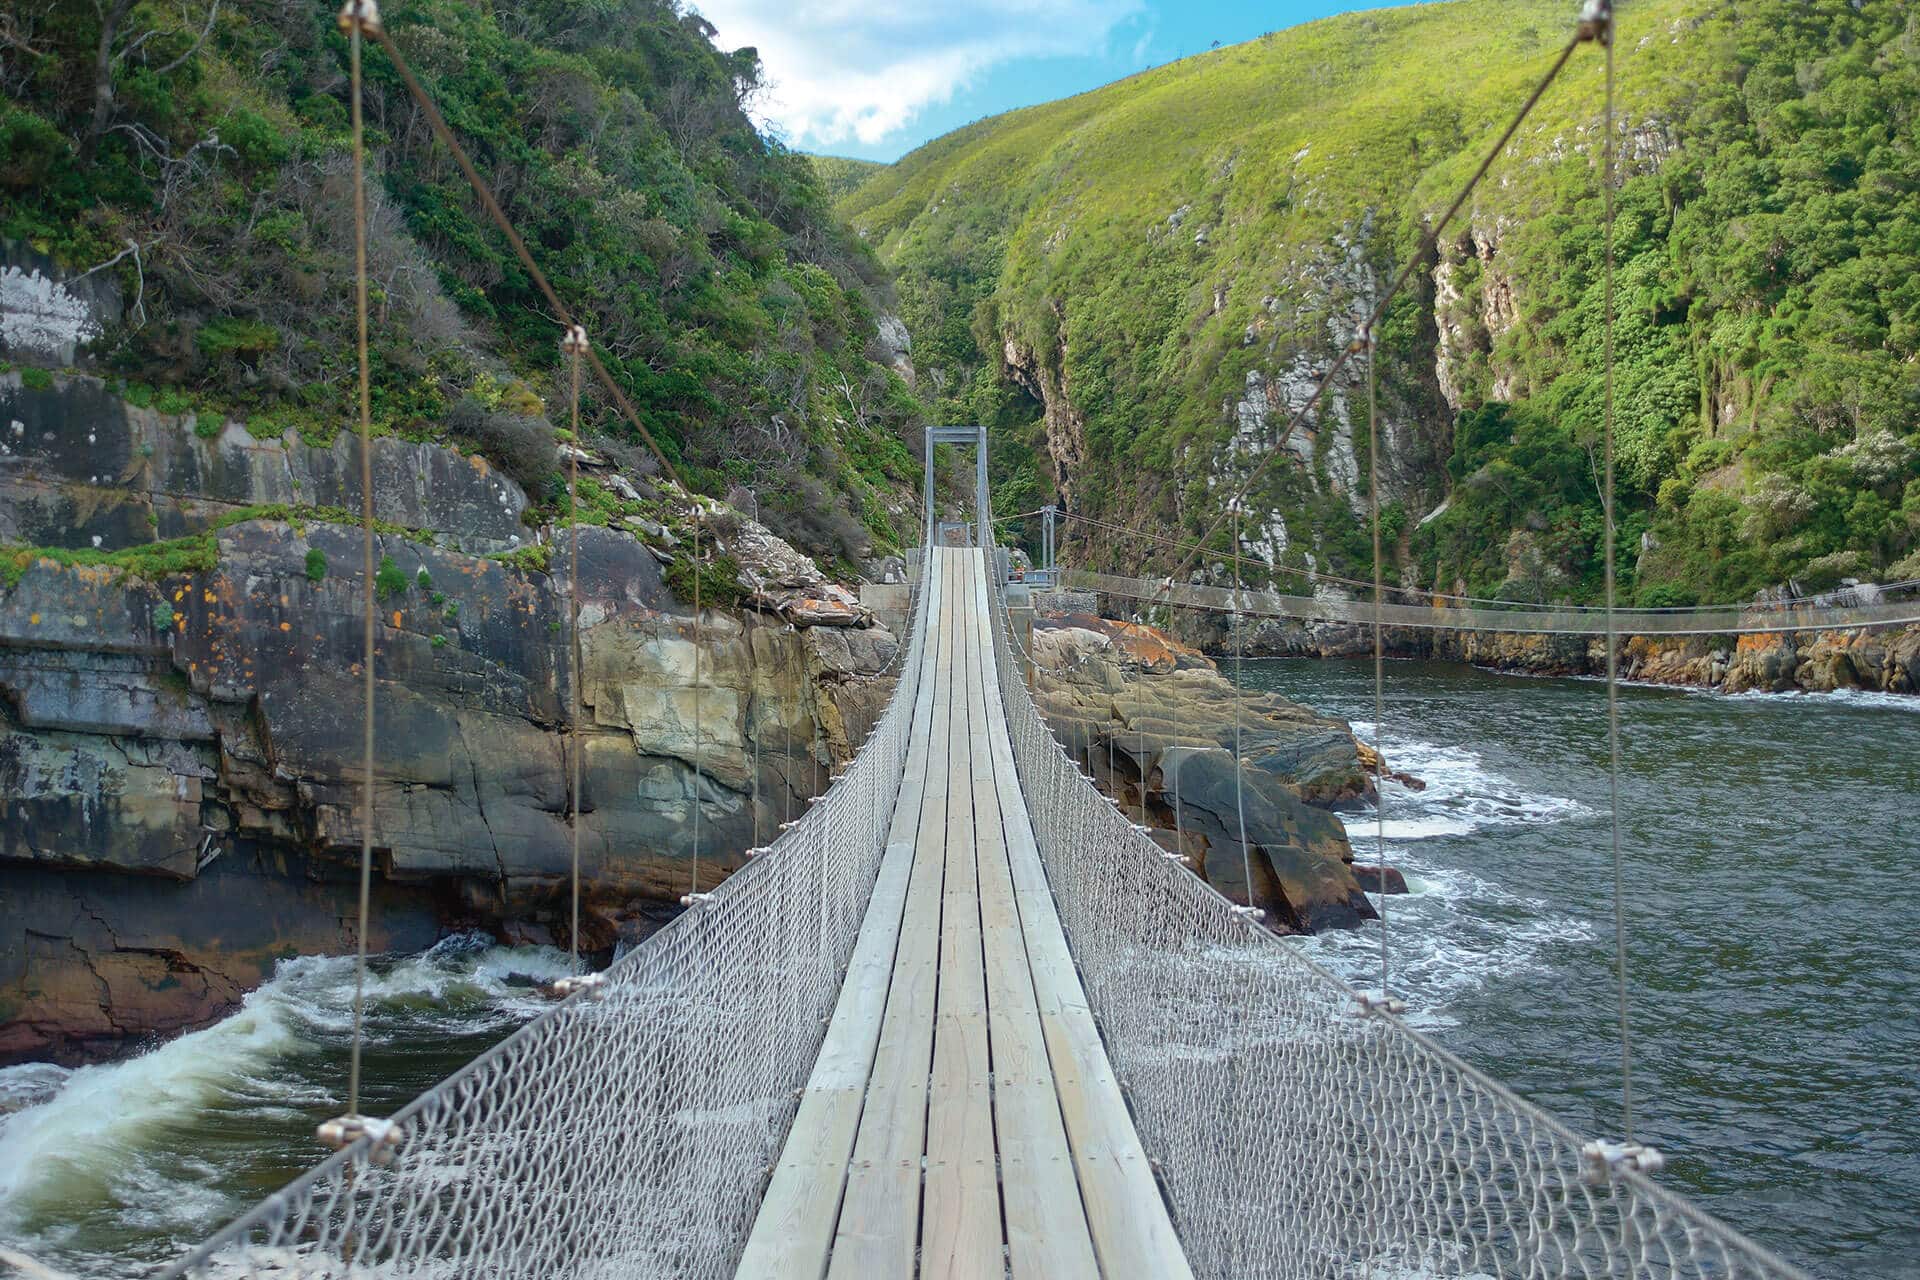 The Storms River suspension bridge on South Africa's Garden Route